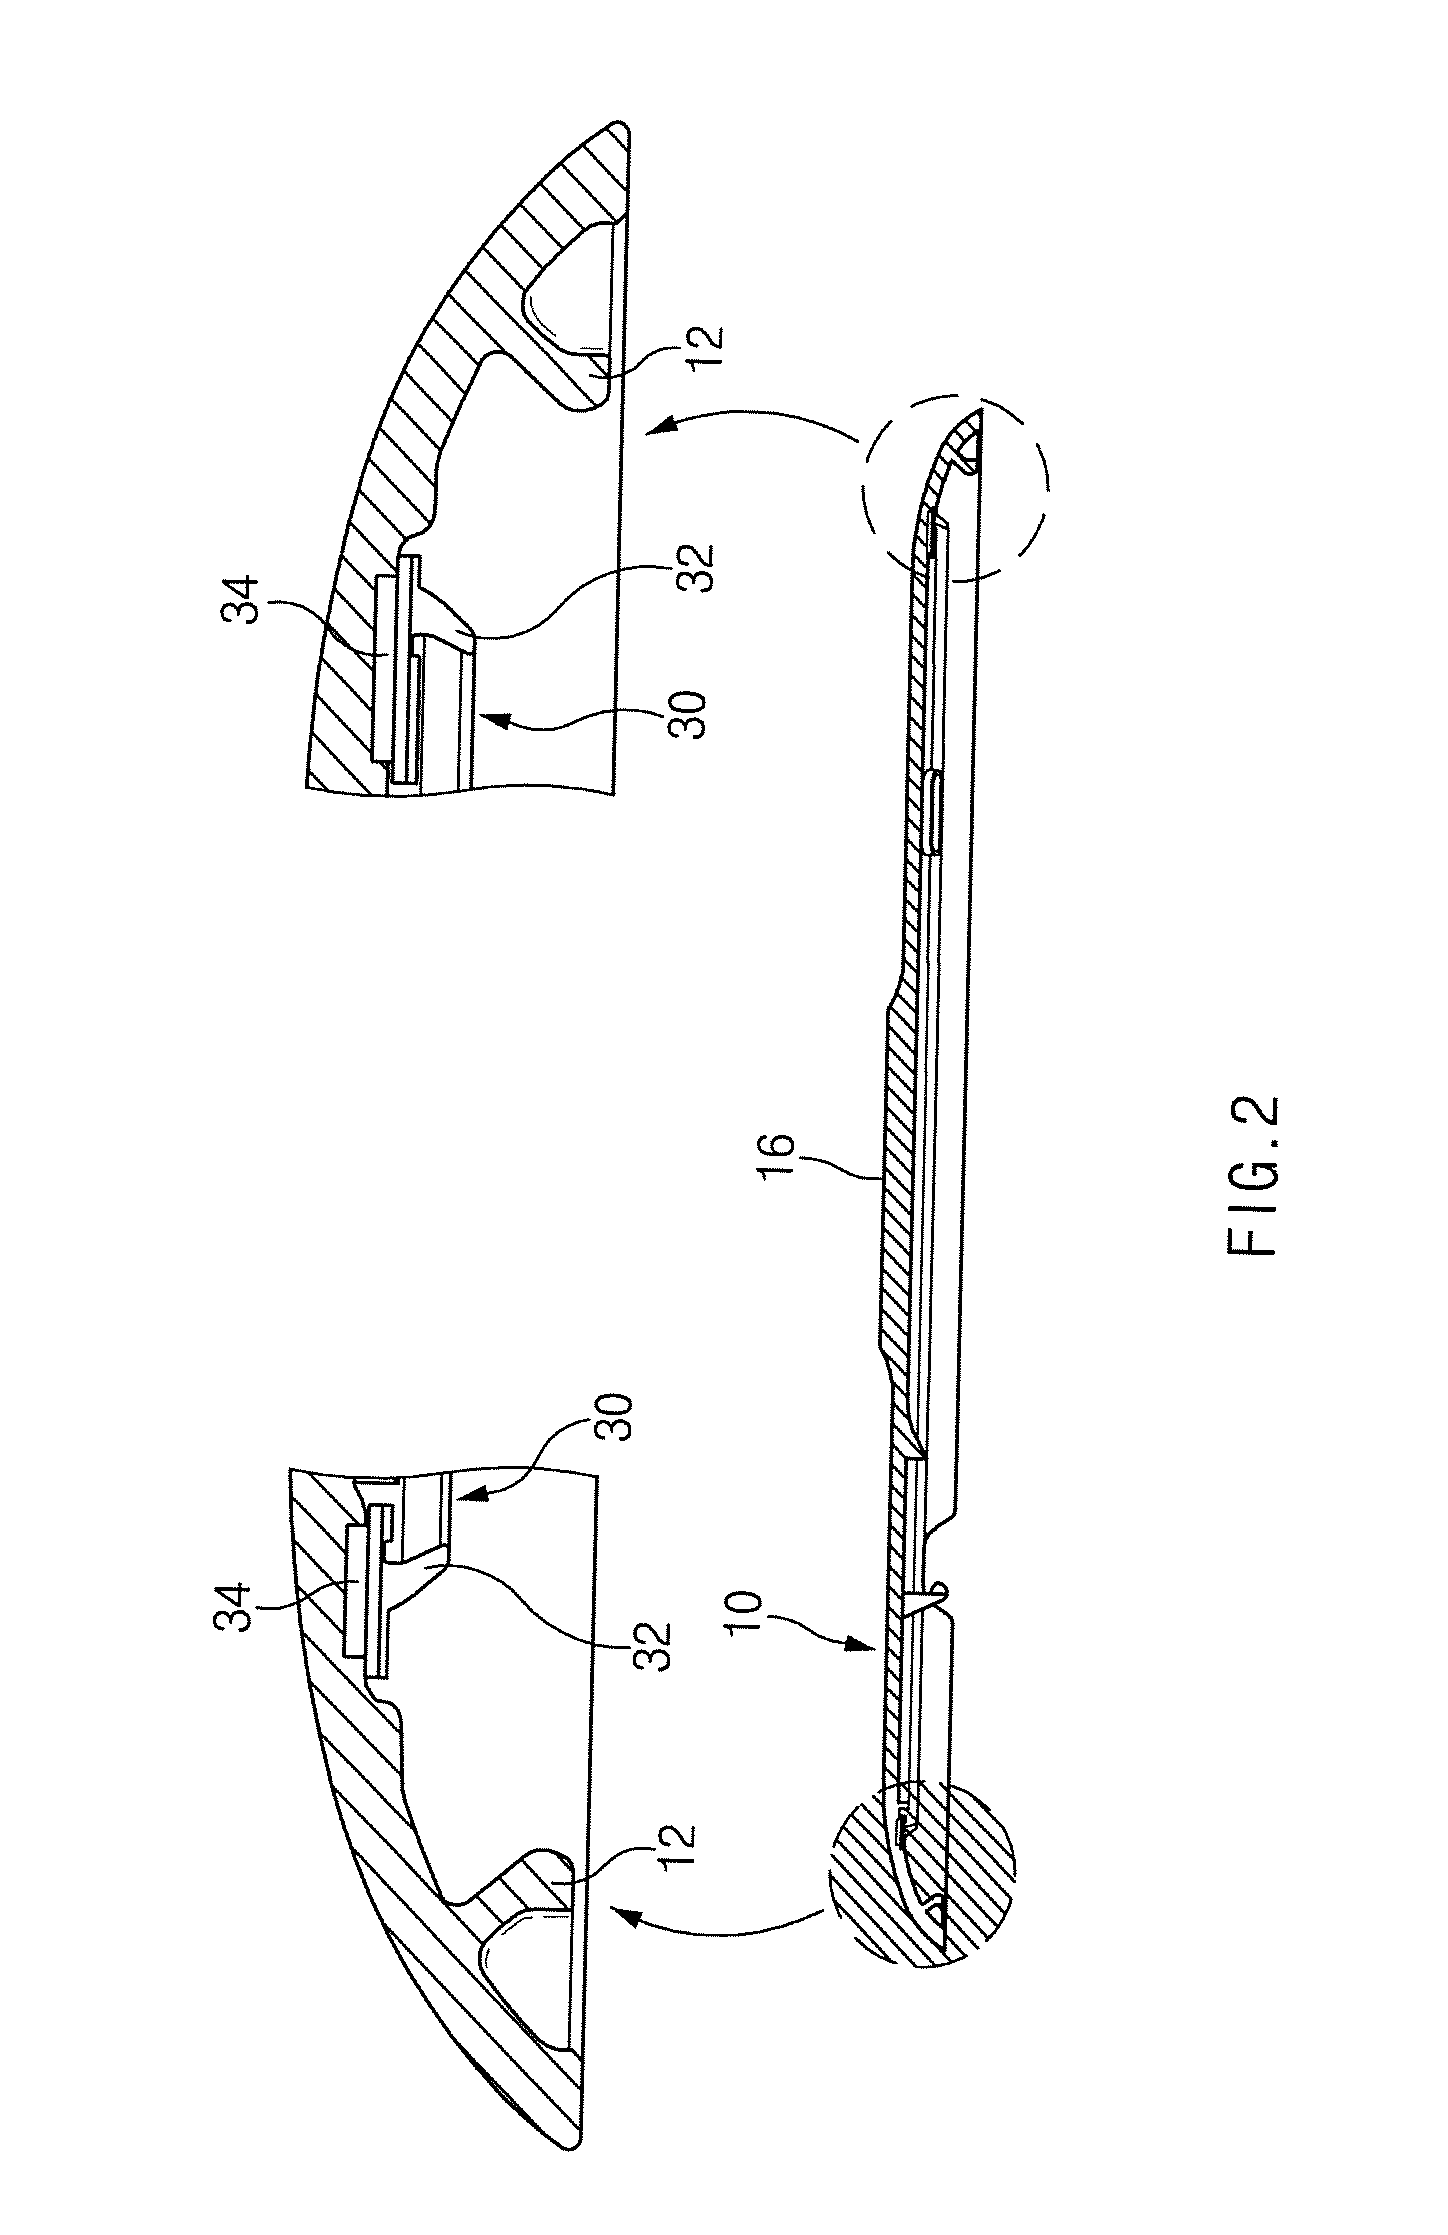 Electronic device including a function of water proof and cover thereof